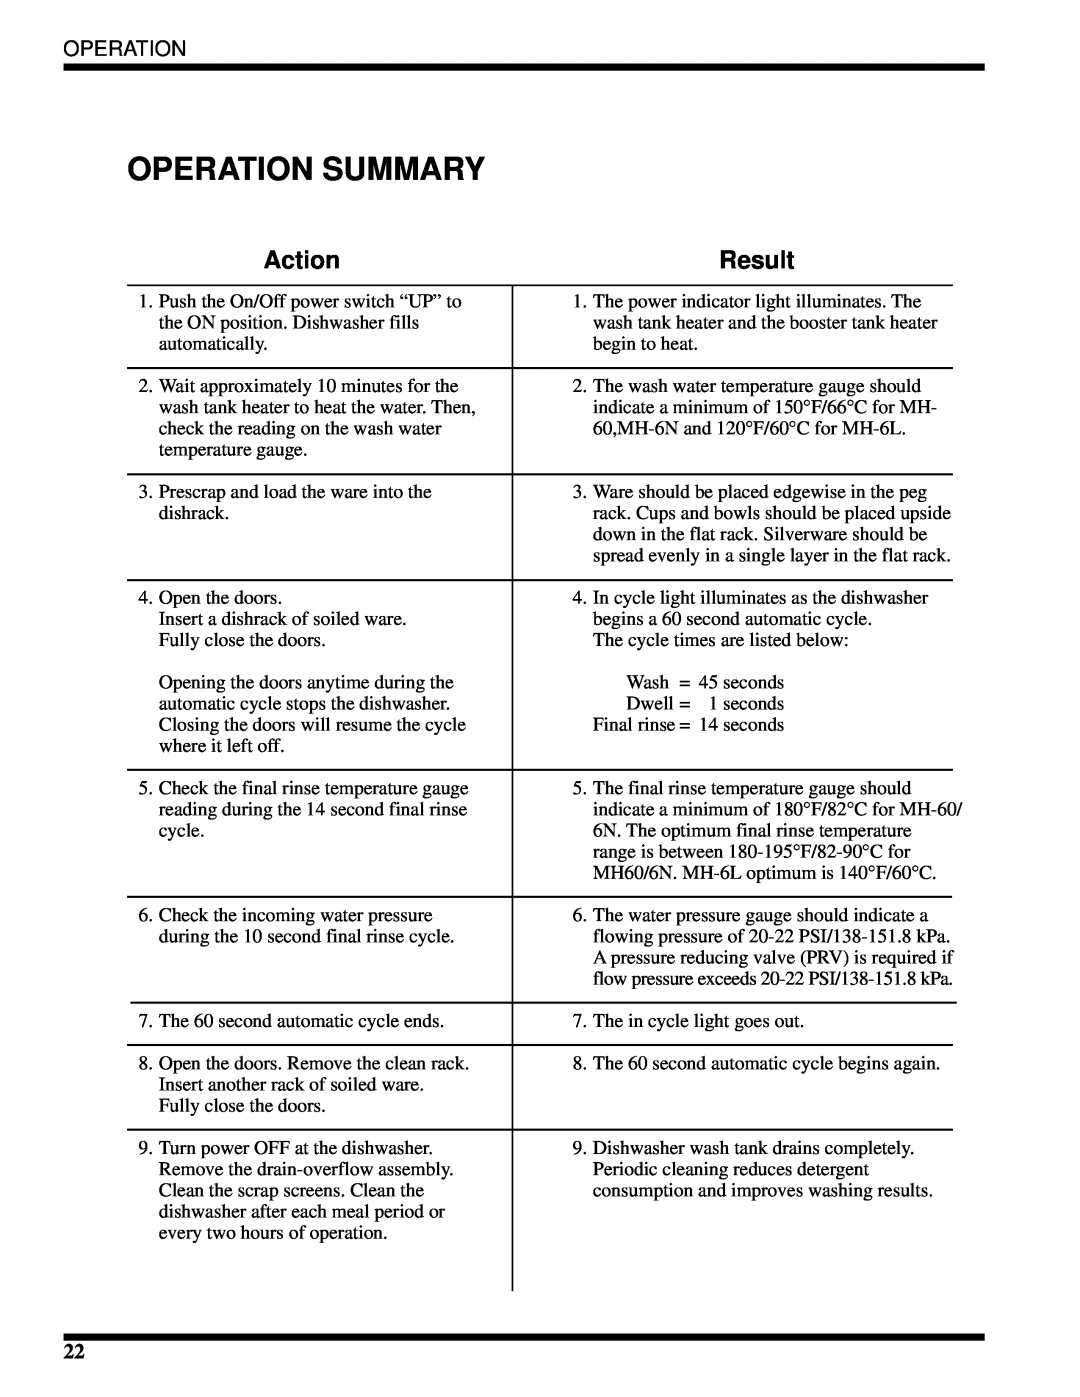 Moyer Diebel MH-6NM2, MH-60M2, MH-6LM2 technical manual Operation Summary, Action, Result 